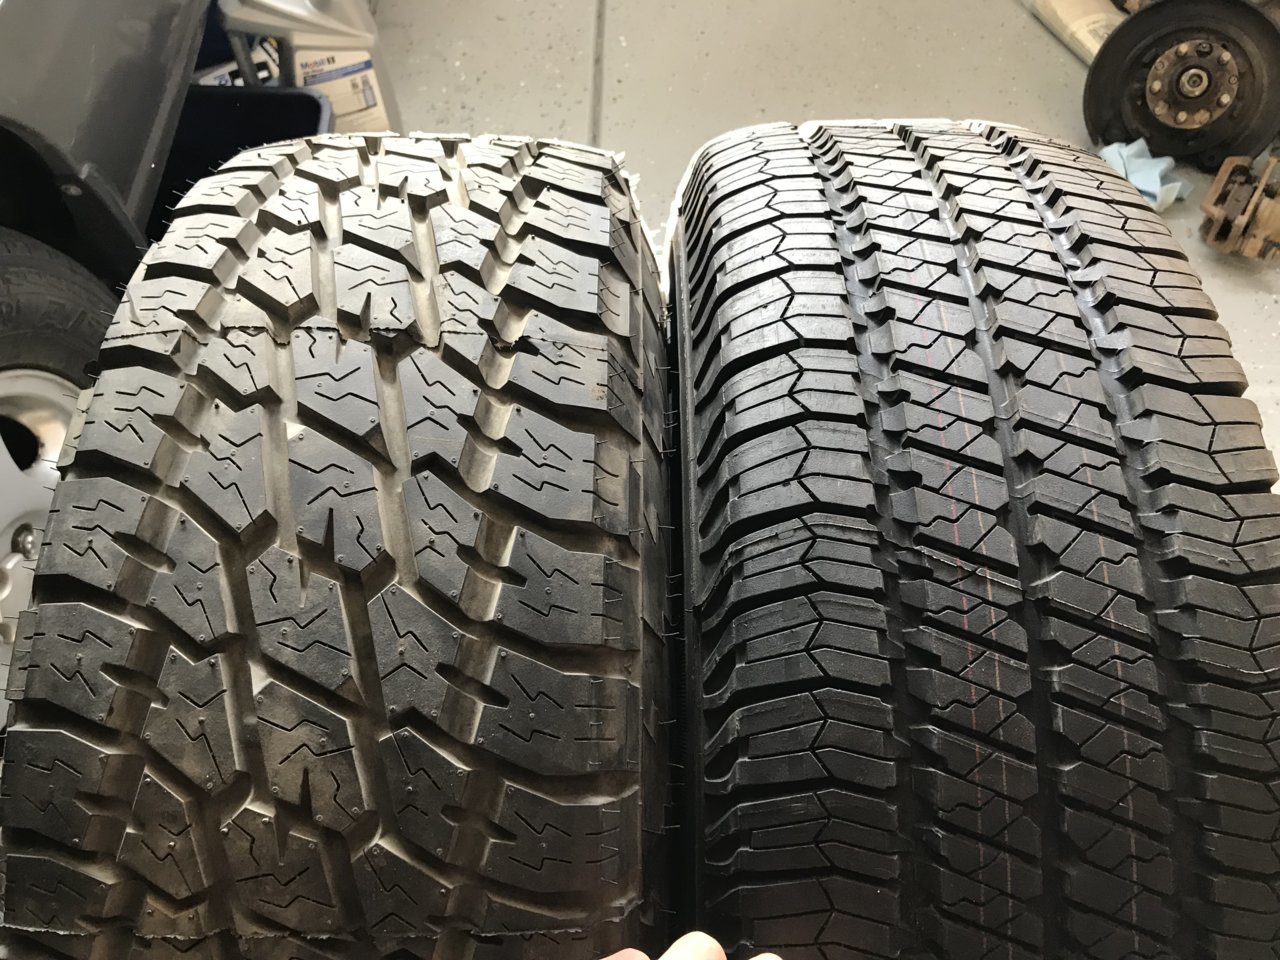 Spare Tire Question for 255/75/R17 | Tacoma World